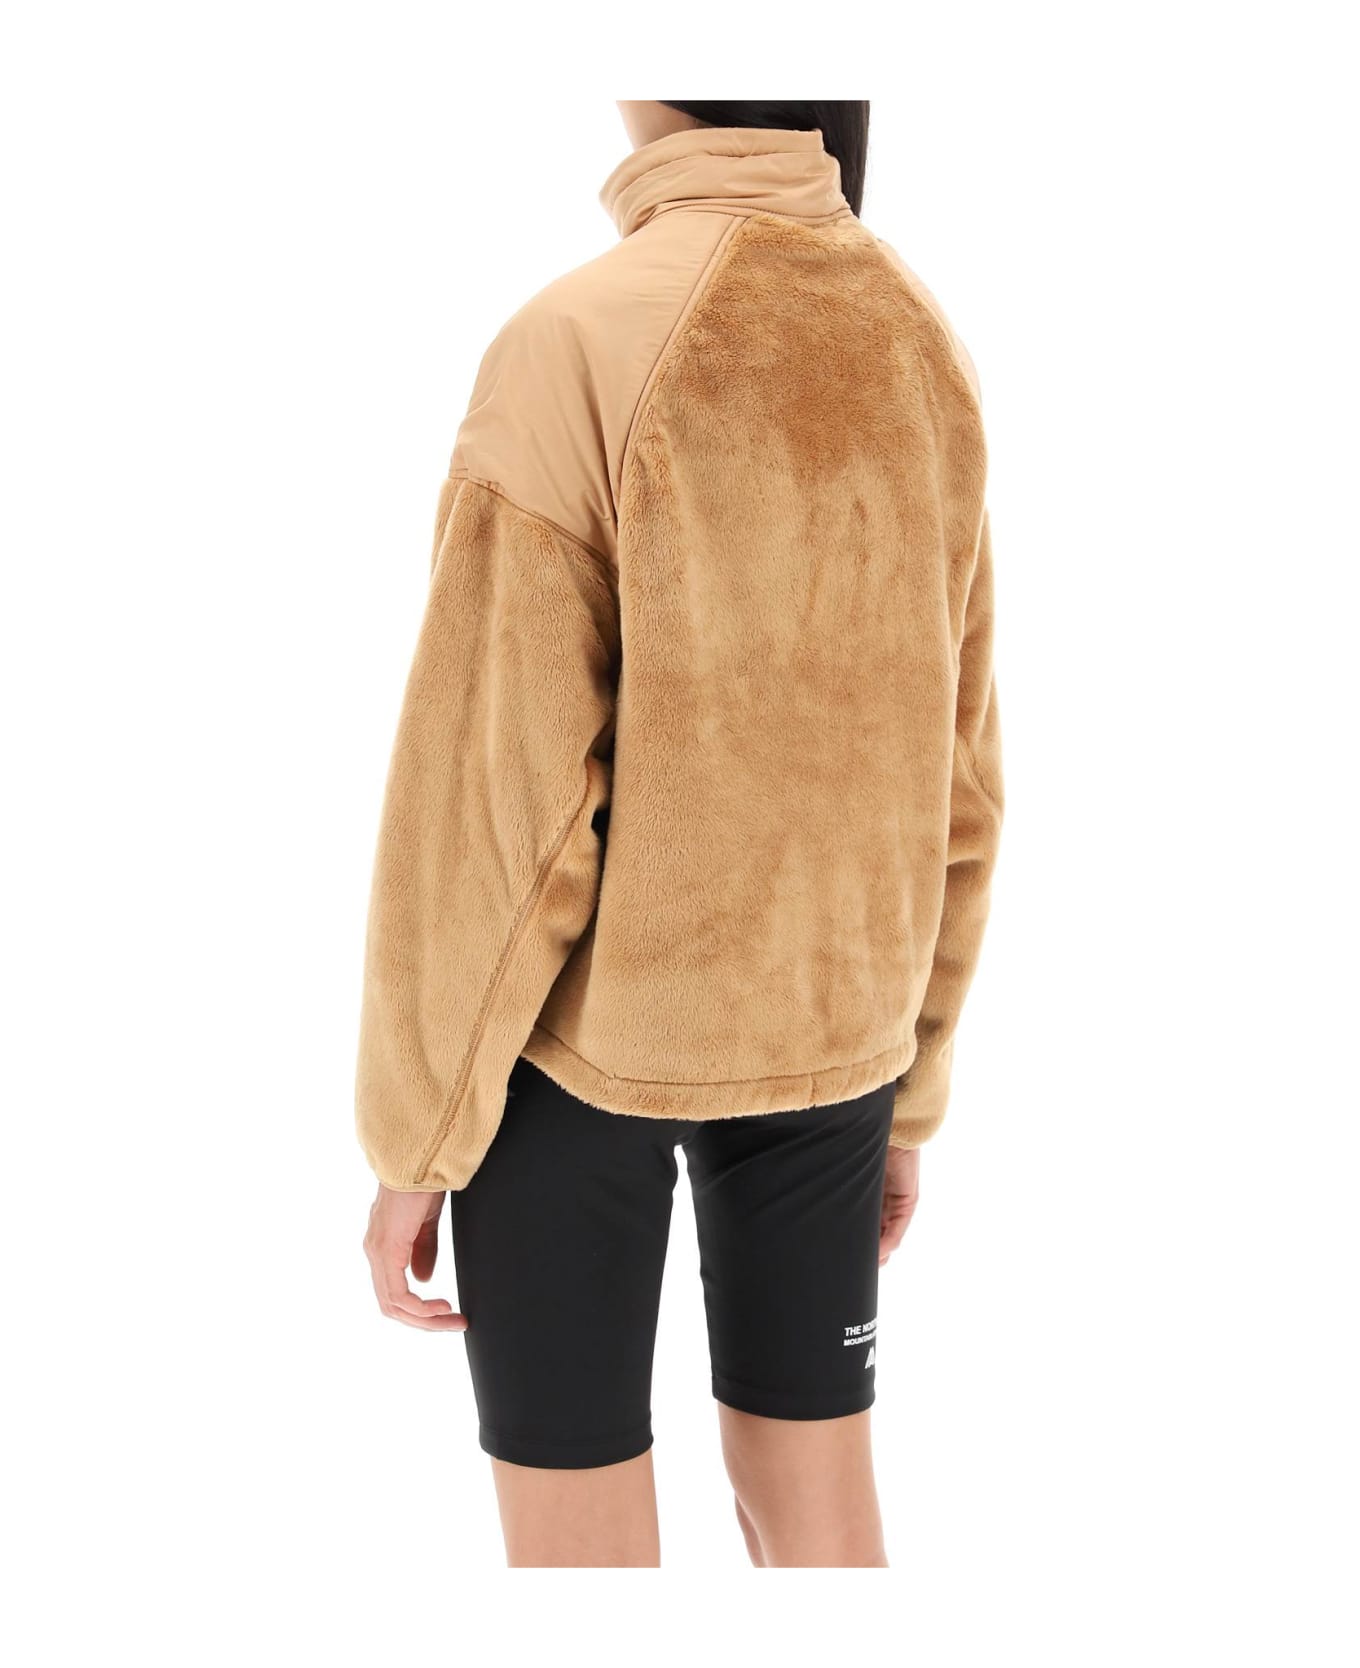 The North Face Versa Velour Jacket In Recycled Fleece And Ripstop - ALMOND BUTTER (Beige) ジャケット